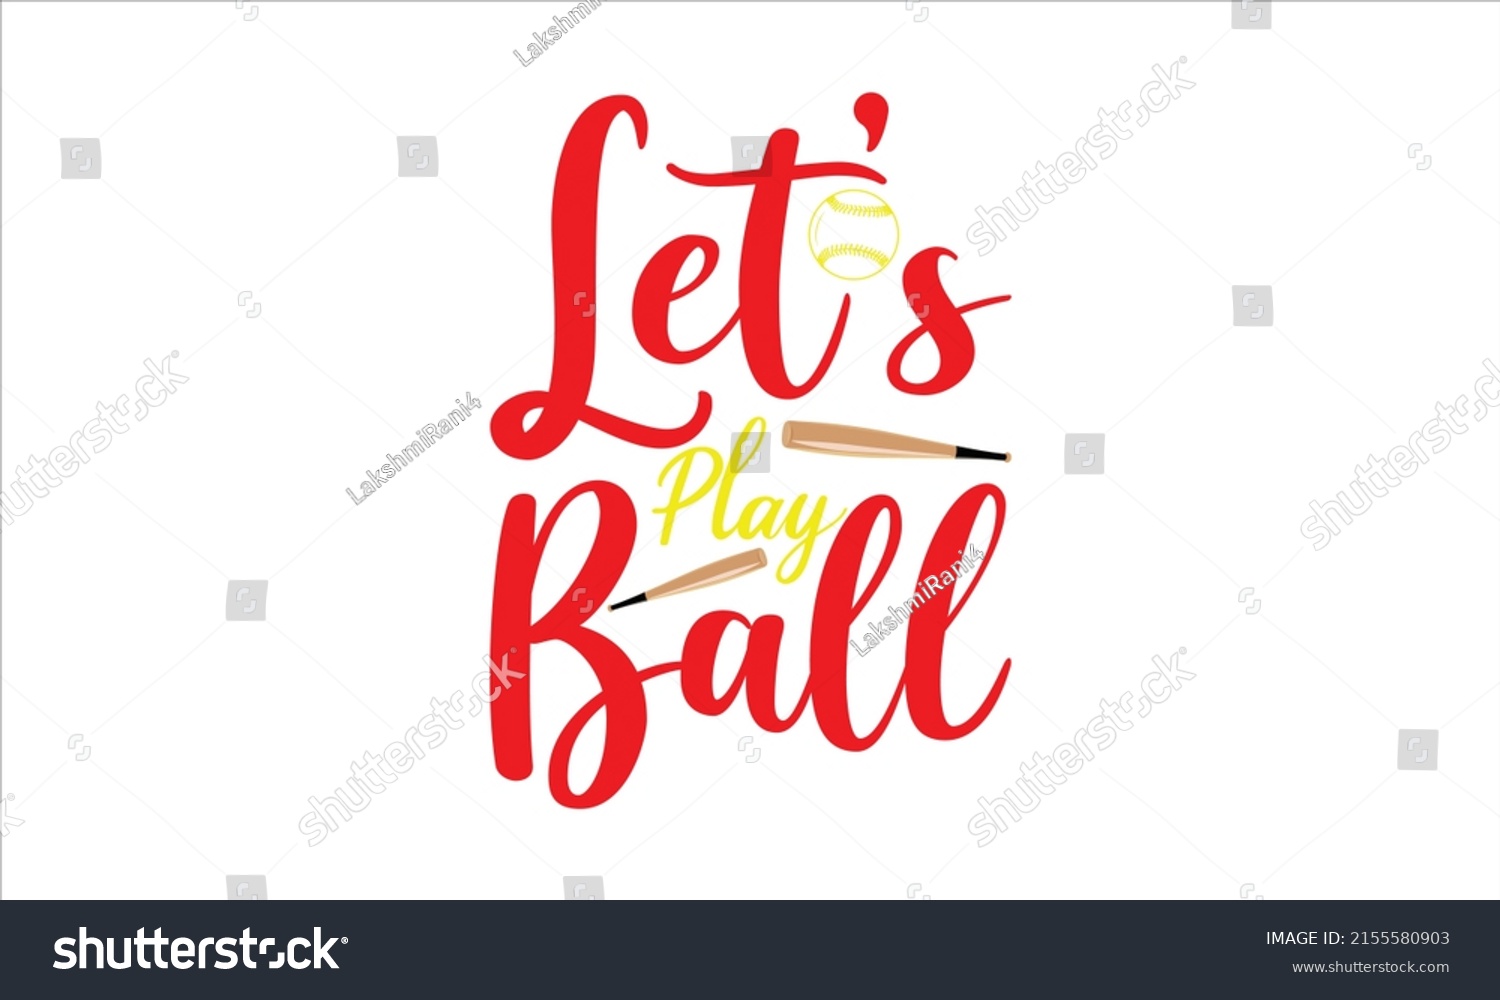 SVG of  Let’s Play Ball  -   Lettering design for greeting banners, Mouse Pads, Prints, Cards and Posters, Mugs, Notebooks, Floor Pillows and T-shirt prints design.
 svg